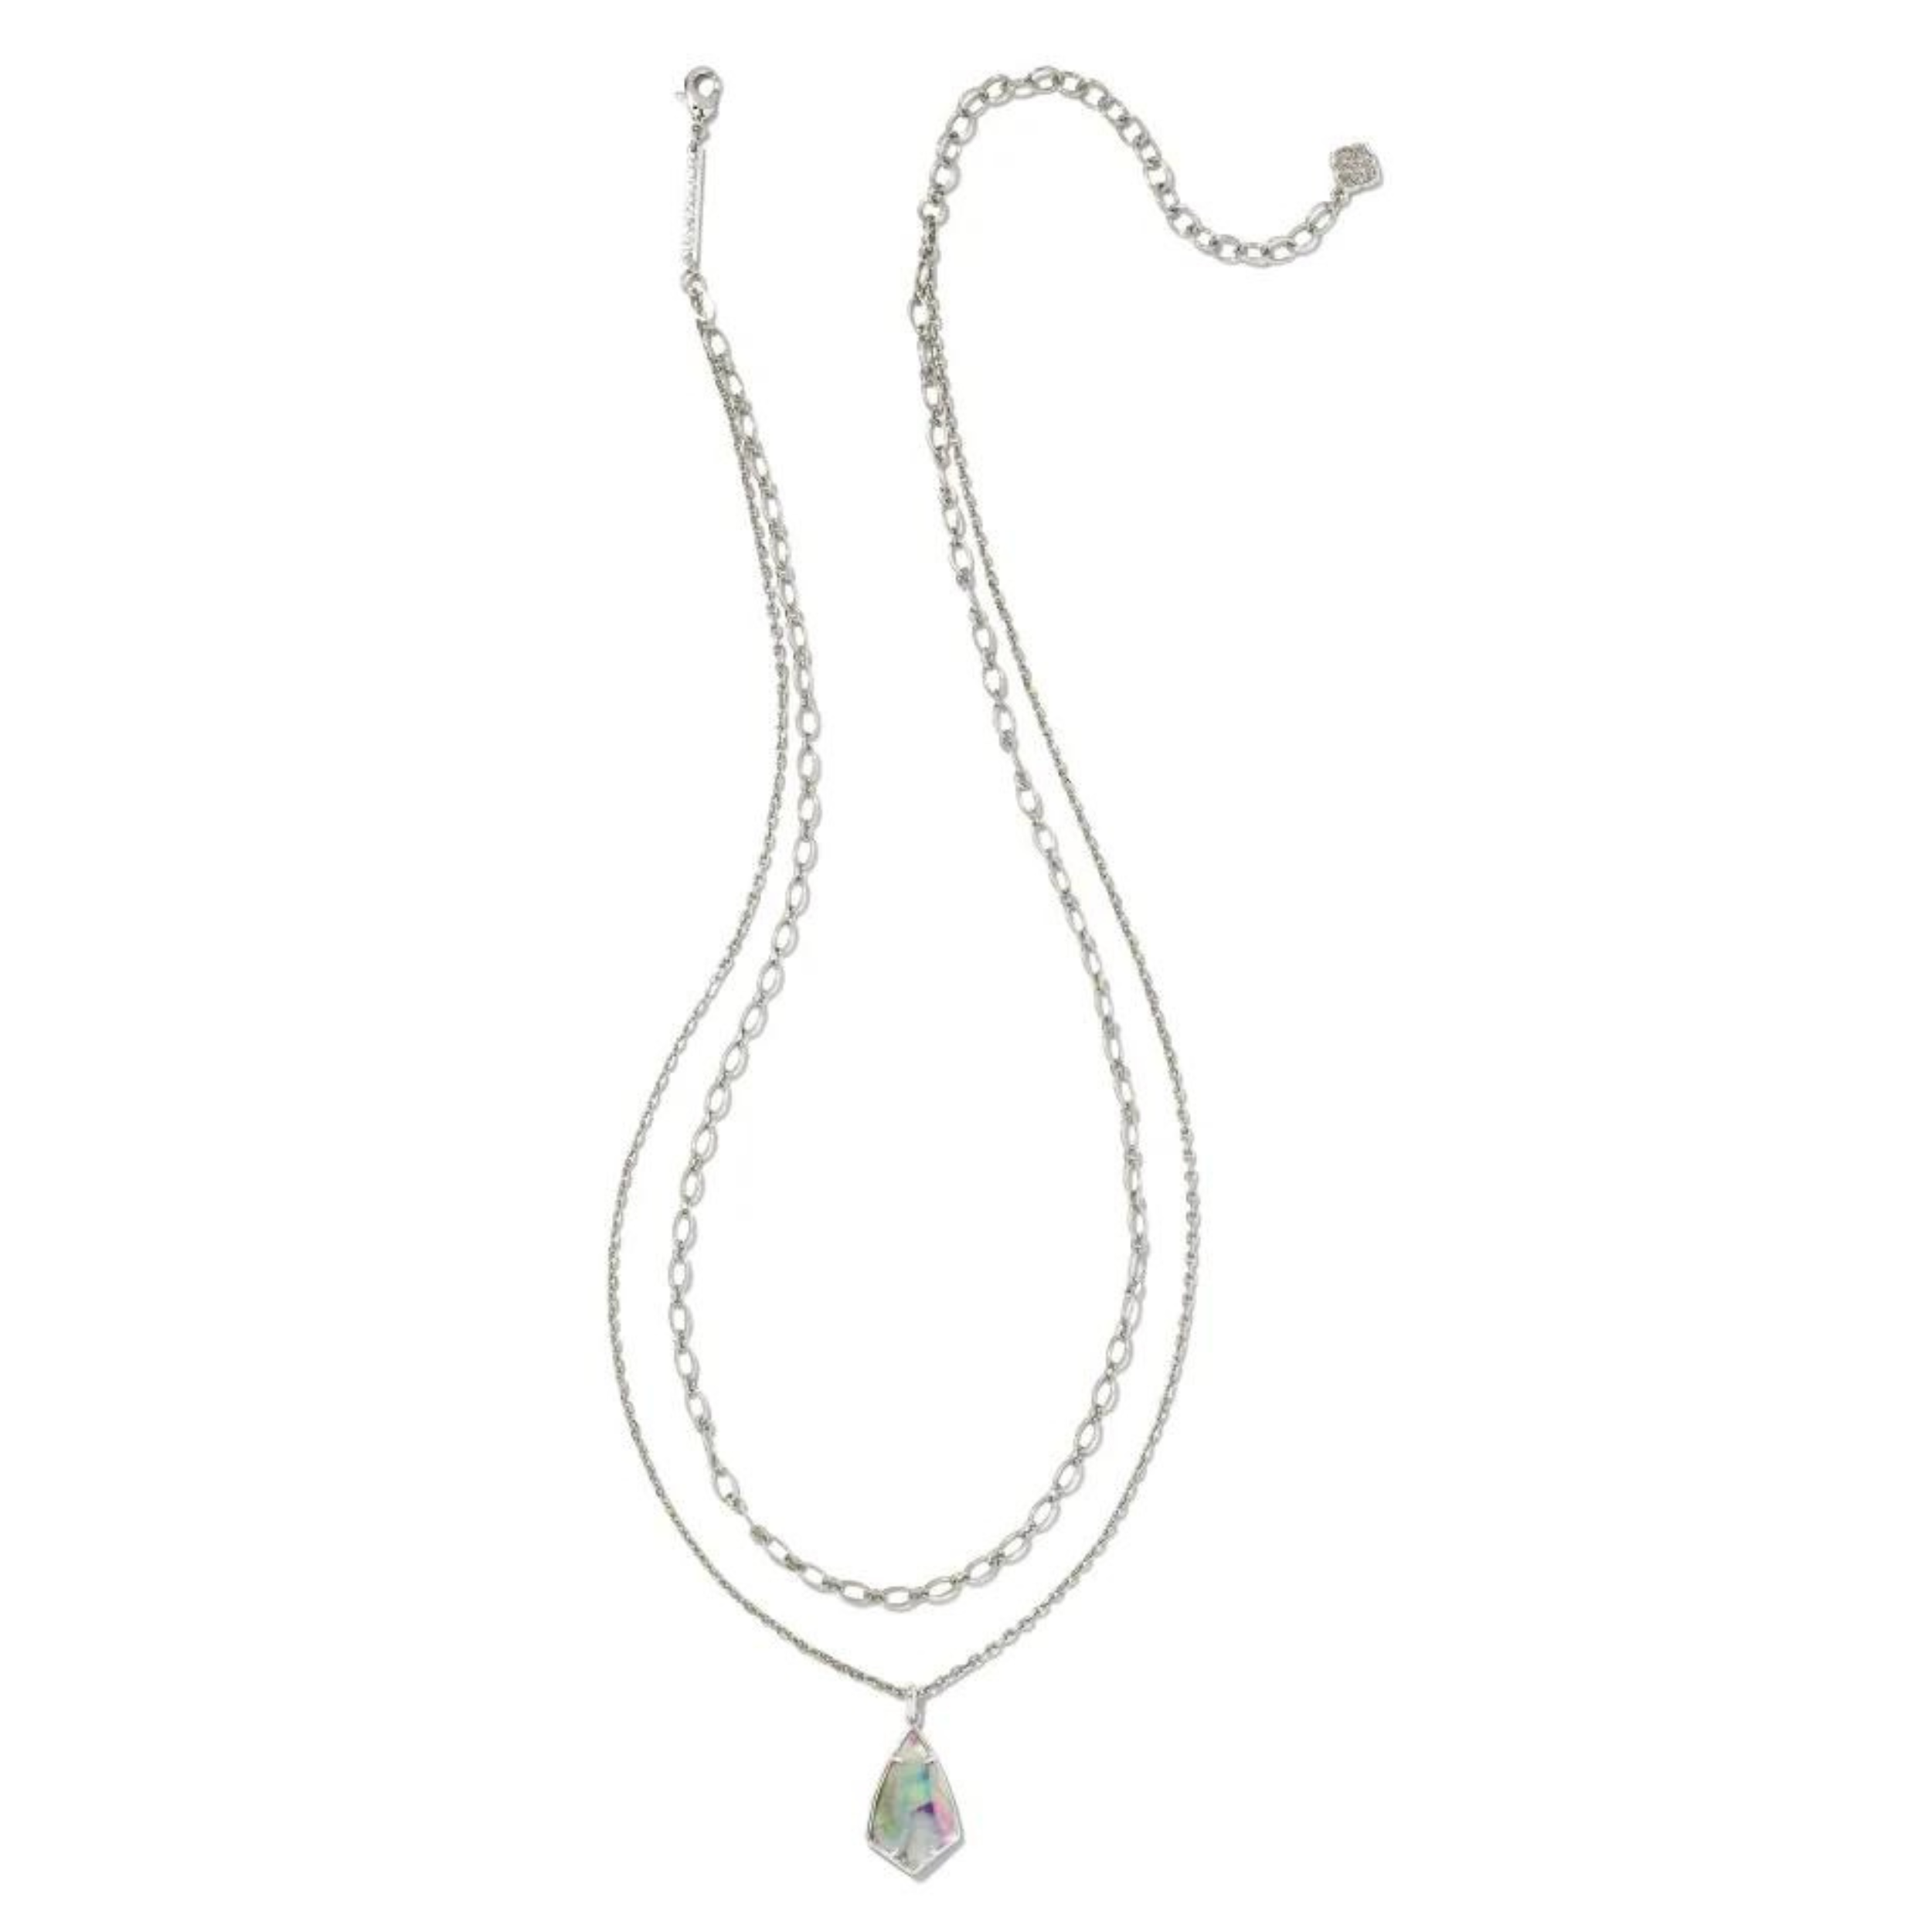 Kendra Scott | Camry Silver Multi Strand Necklace in Lilac Abalone - Giddy Up Glamour Boutique